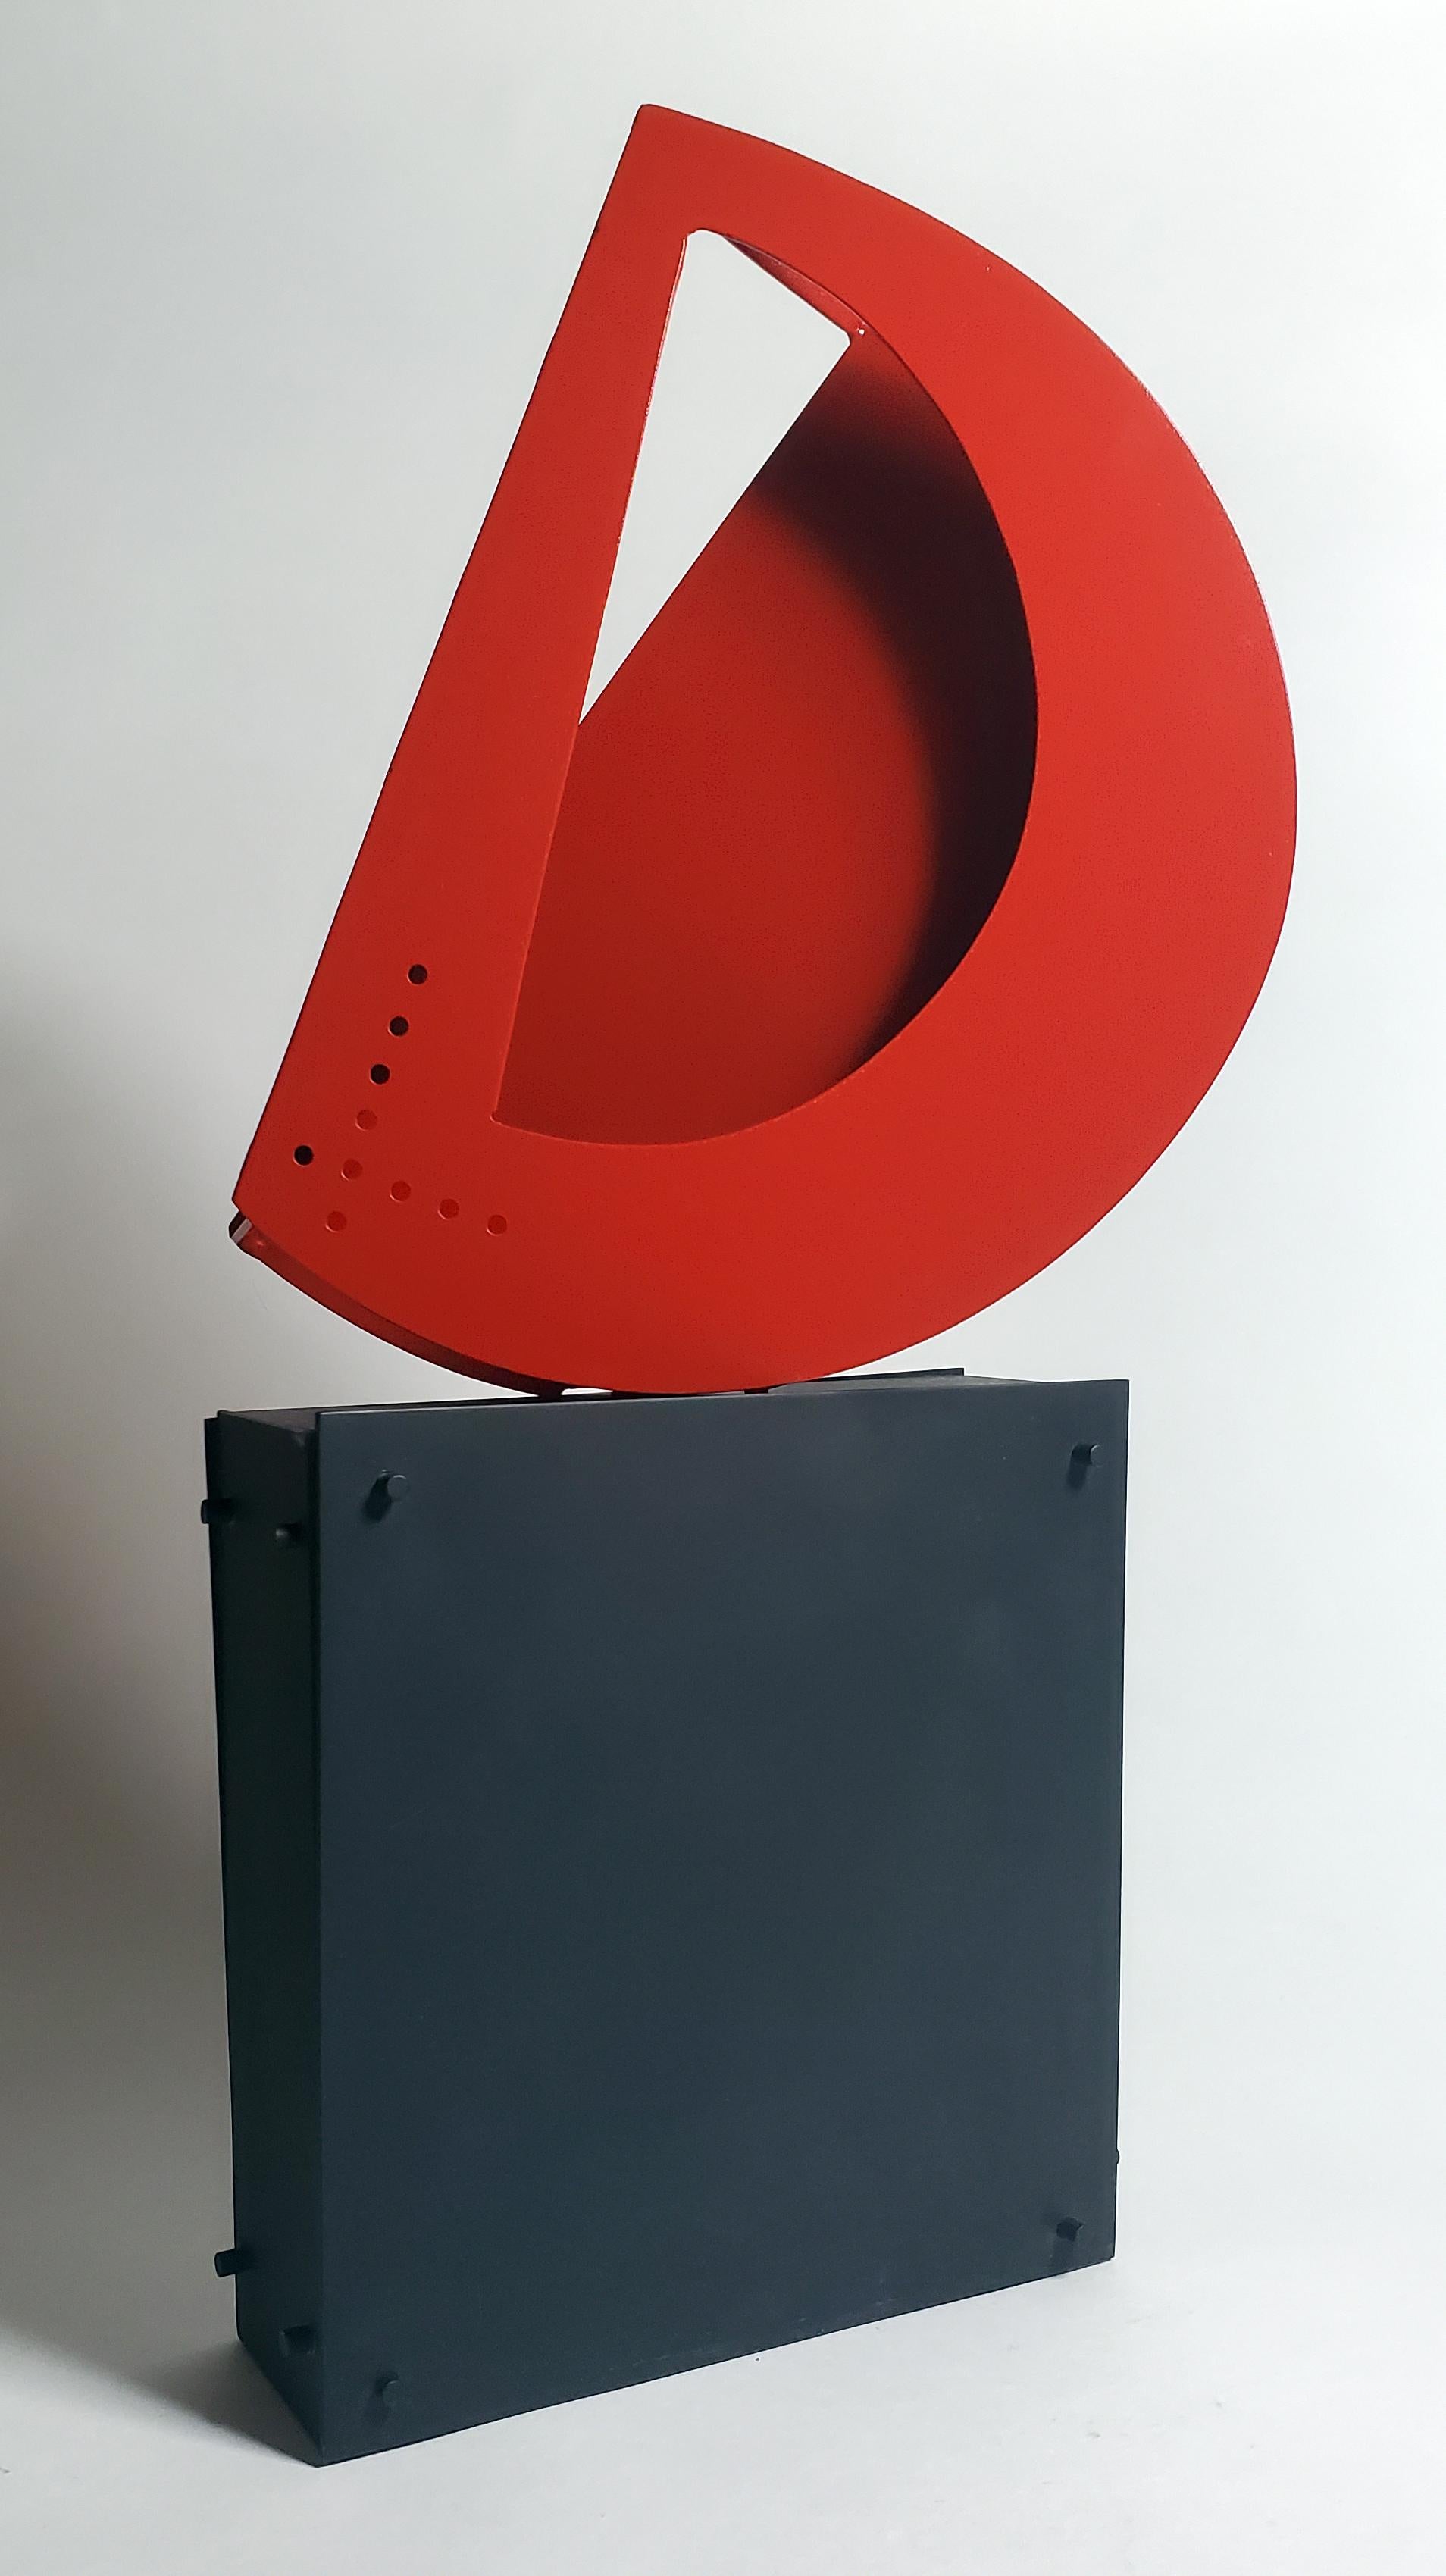 Dynamic red sculpture embracing the principles of Constructivism, "The New D"